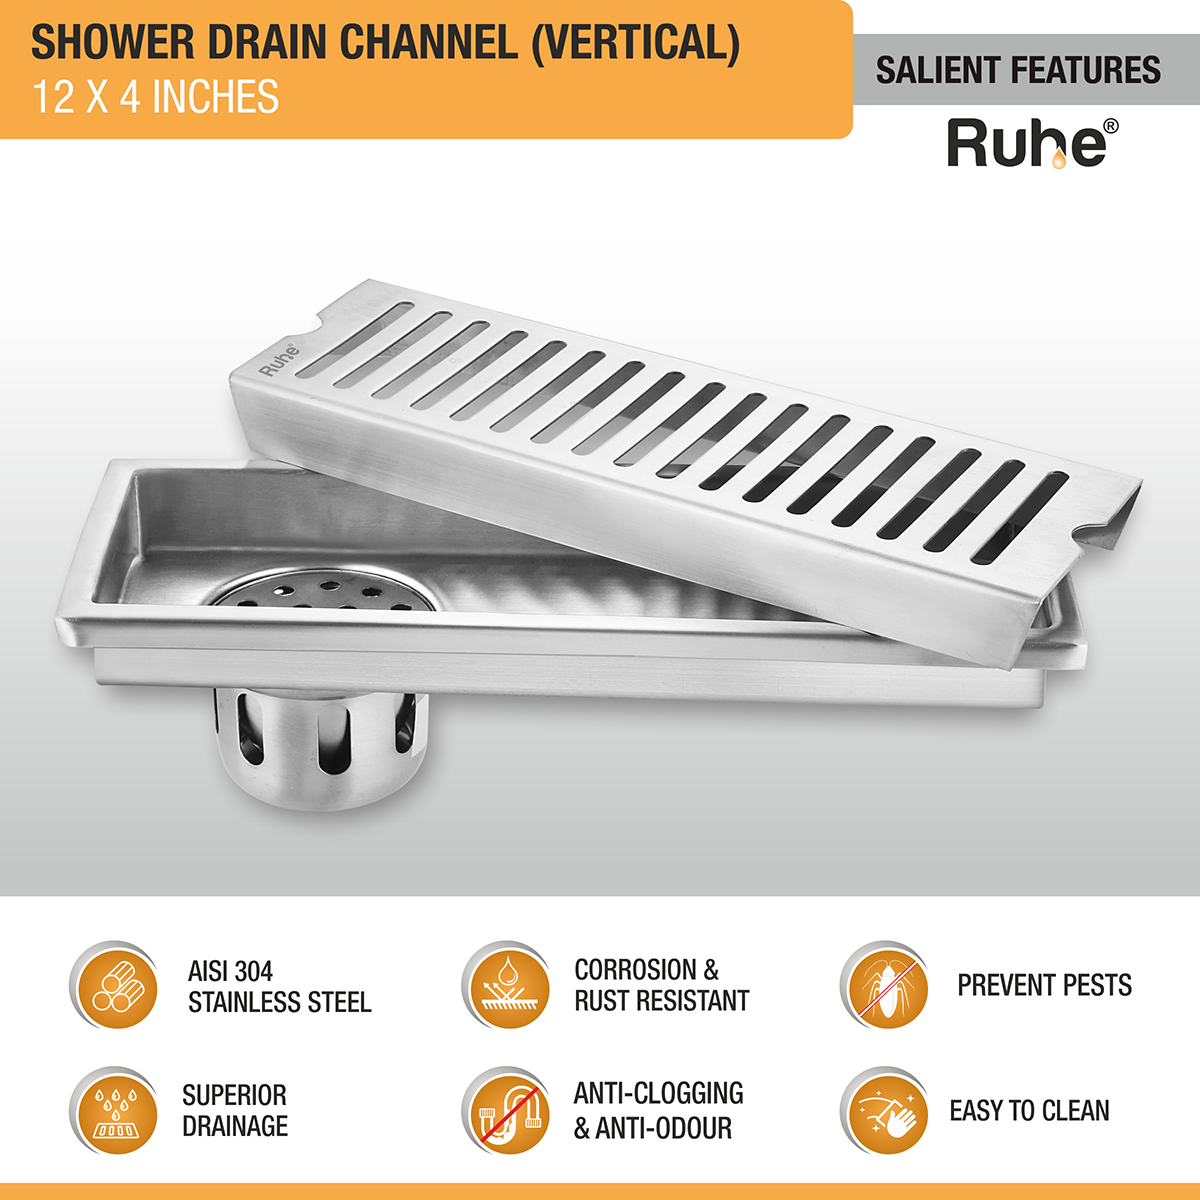 Vertical Shower Drain Channel (12 x 4 Inches) with Cockroach Trap (304 Grade) features